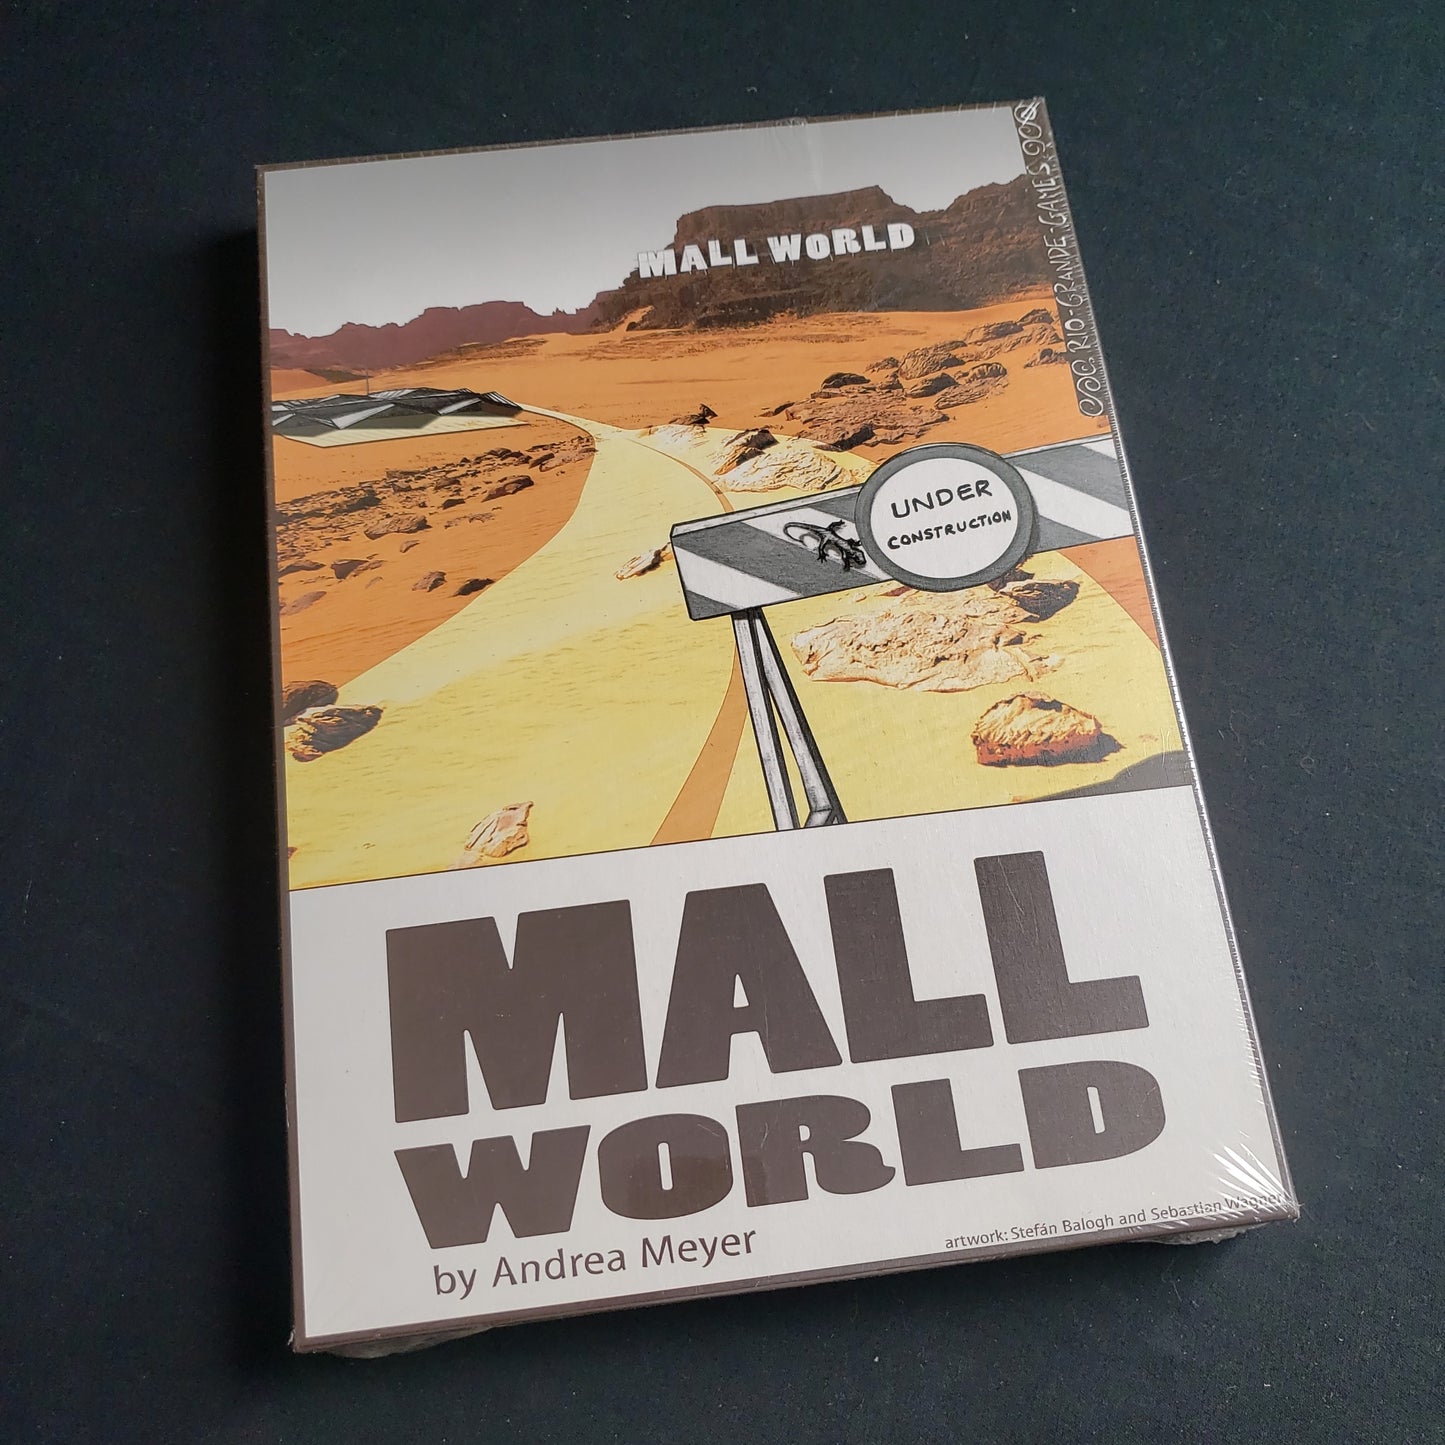 Image shows the front cover of the box of the Mall World board game